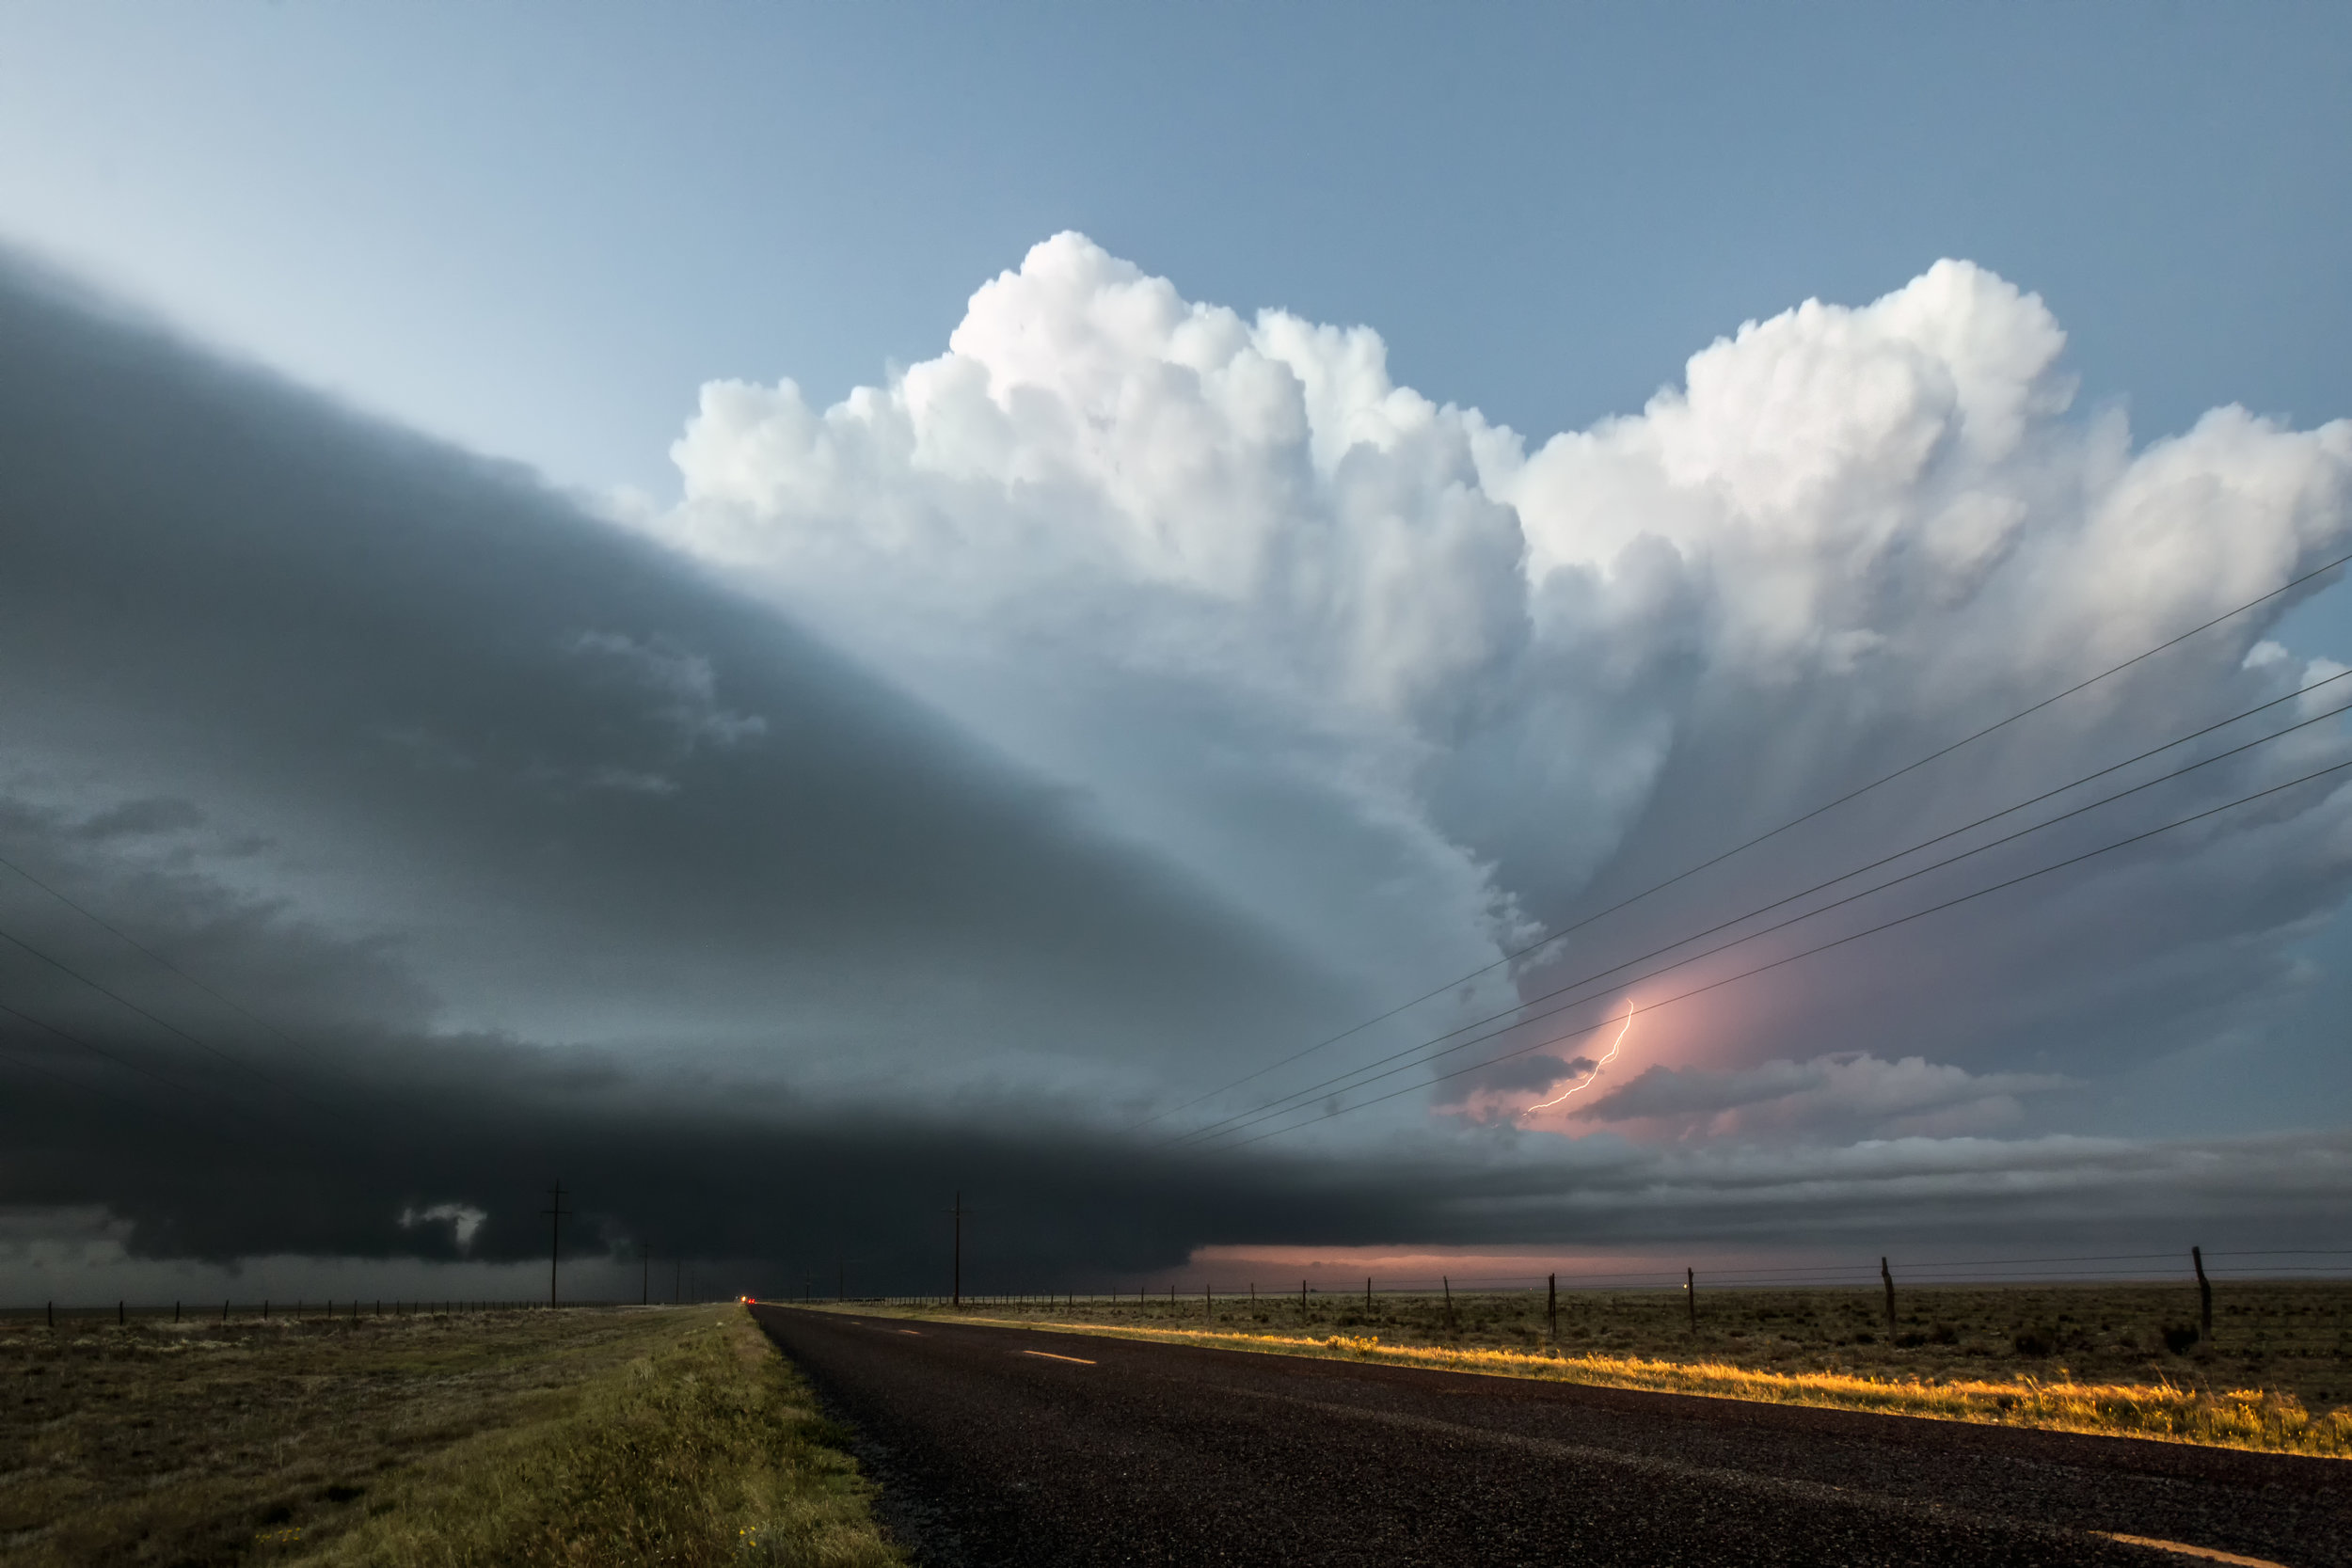 Supercell - Tatum, New Mexico May 9, 2017.jpg